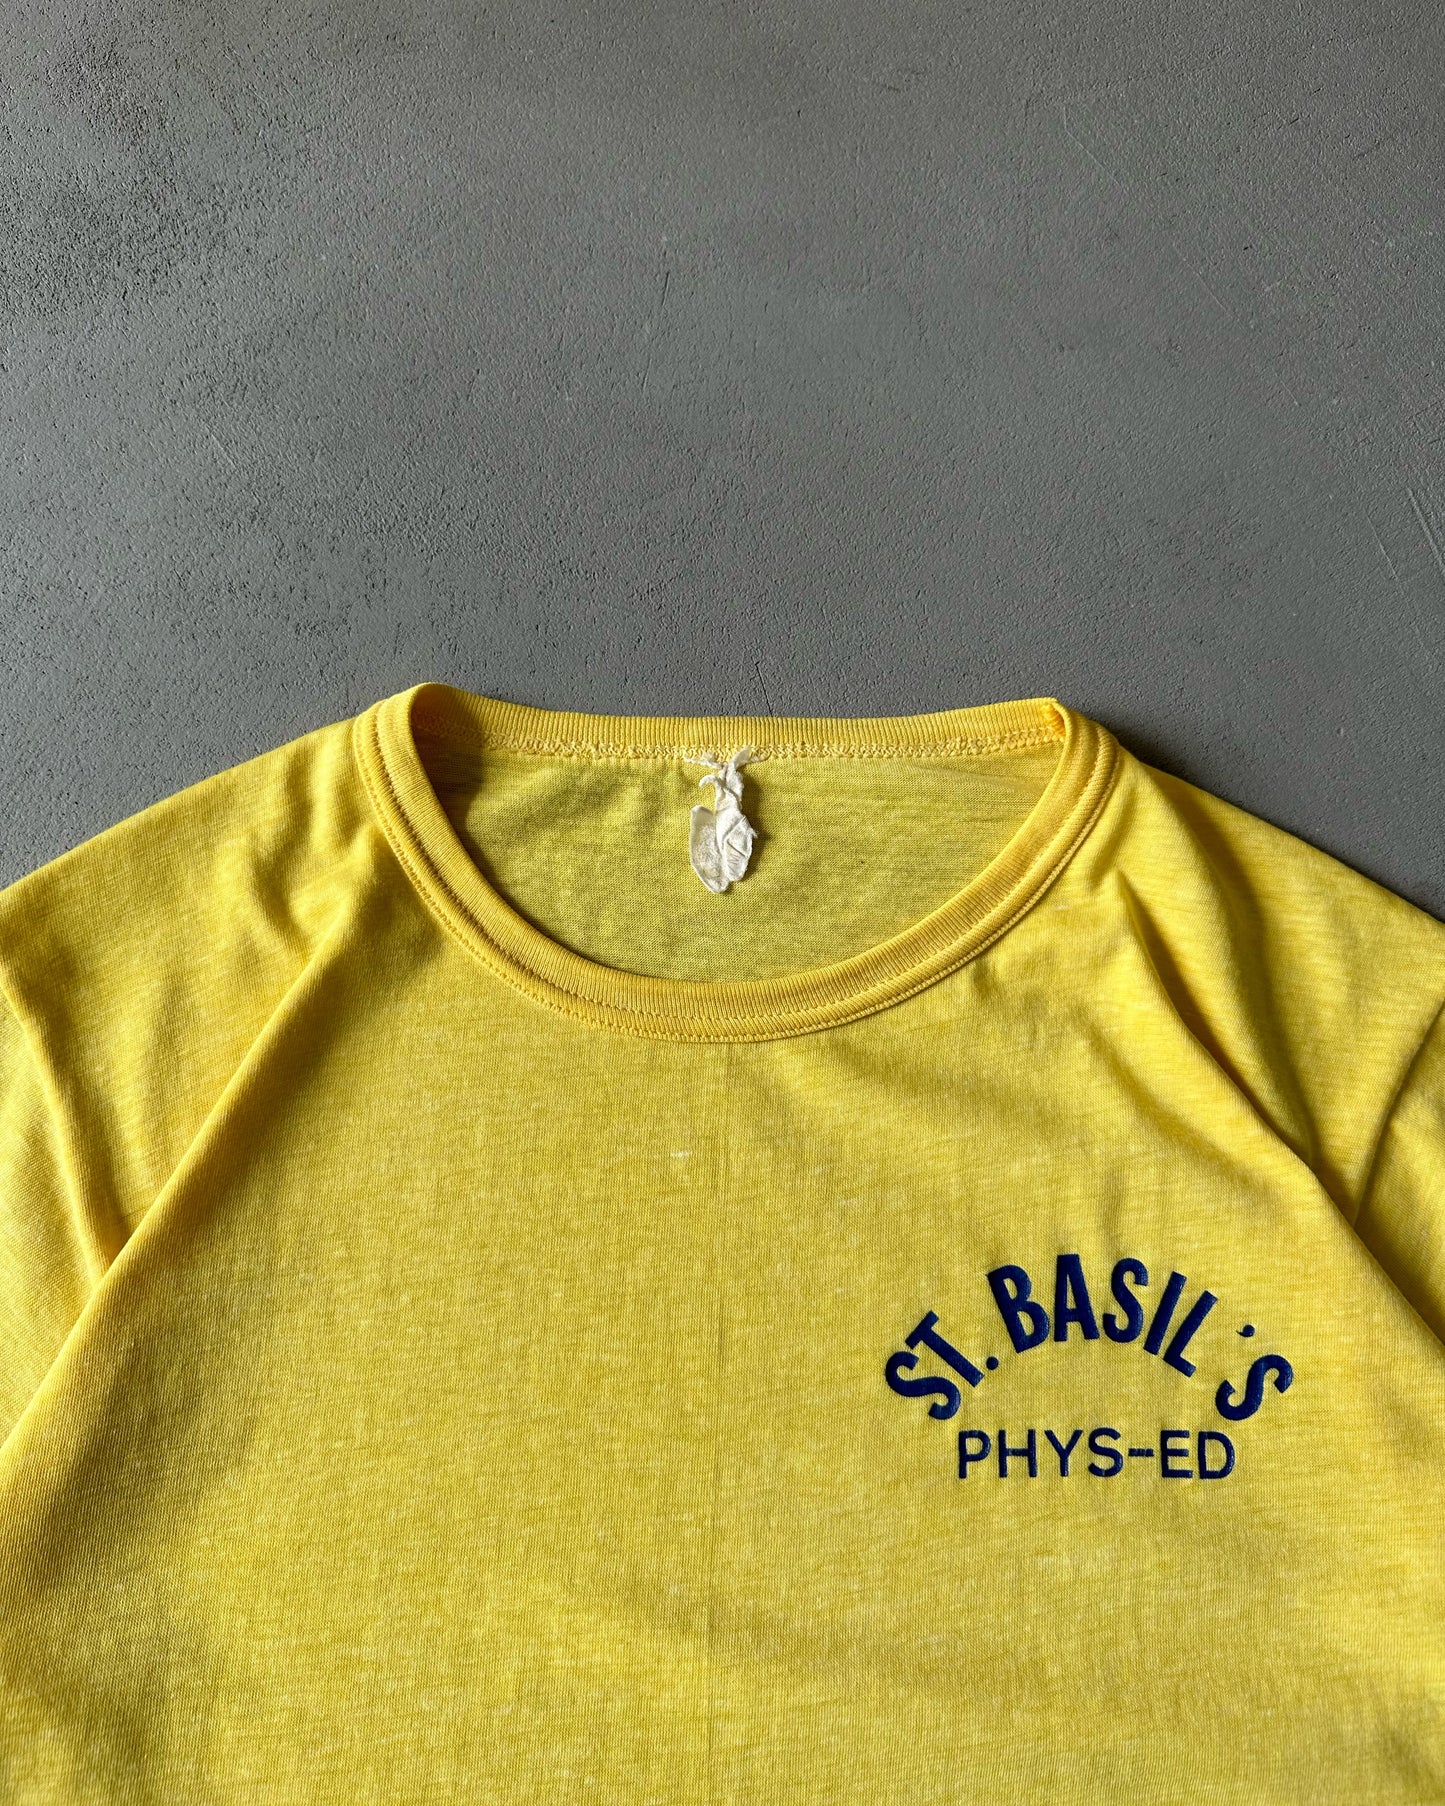 1980s - Yellow "St.Basil's" Ringer Cropped T-Shirt - S